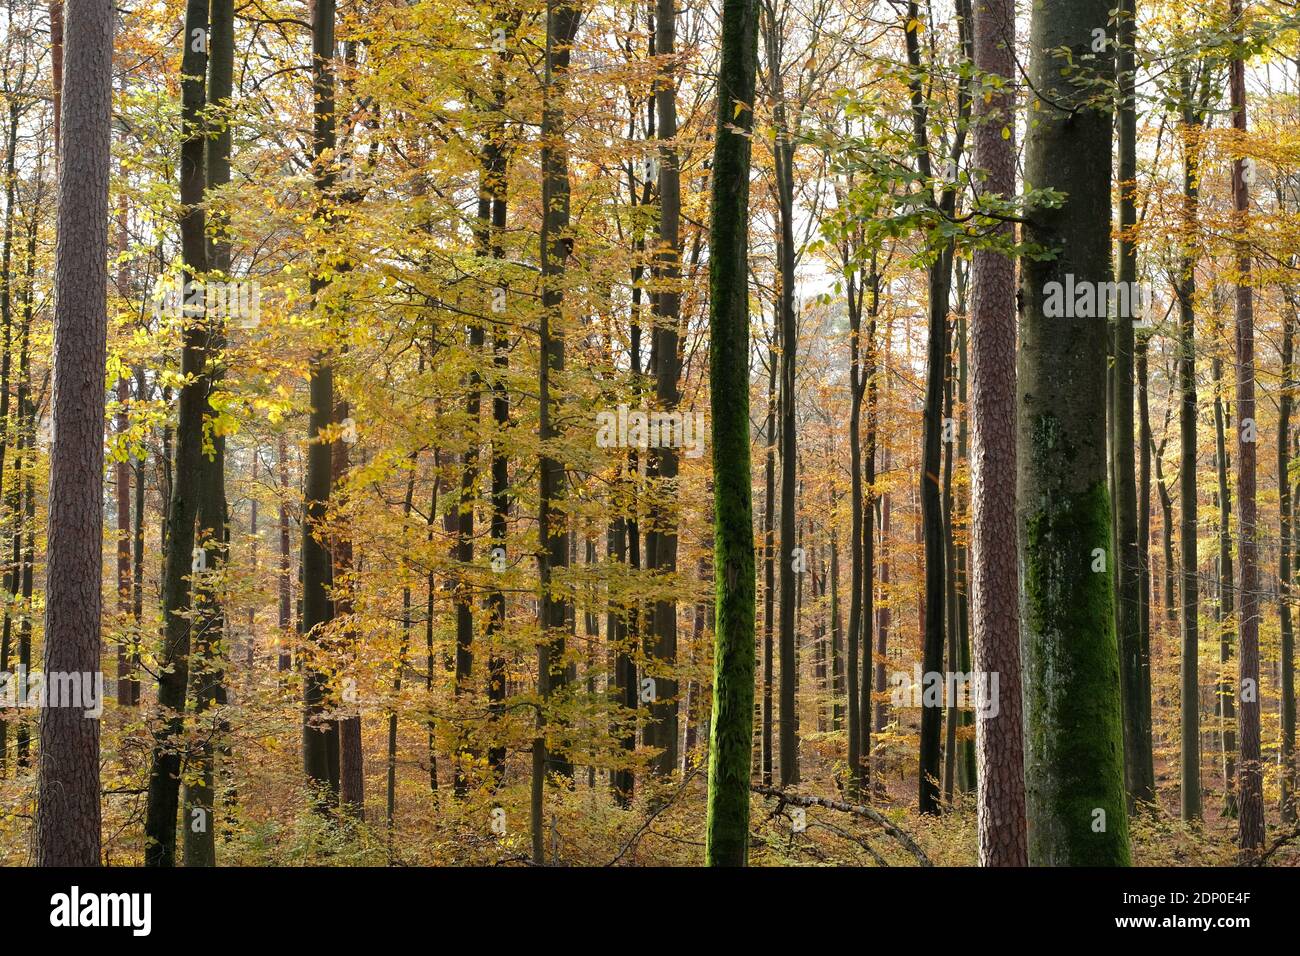 Close Uo Mixed Coniferous Forest. Broadleaf Trees And Tree Trunks With Autumn Colour Background. Stock Photo